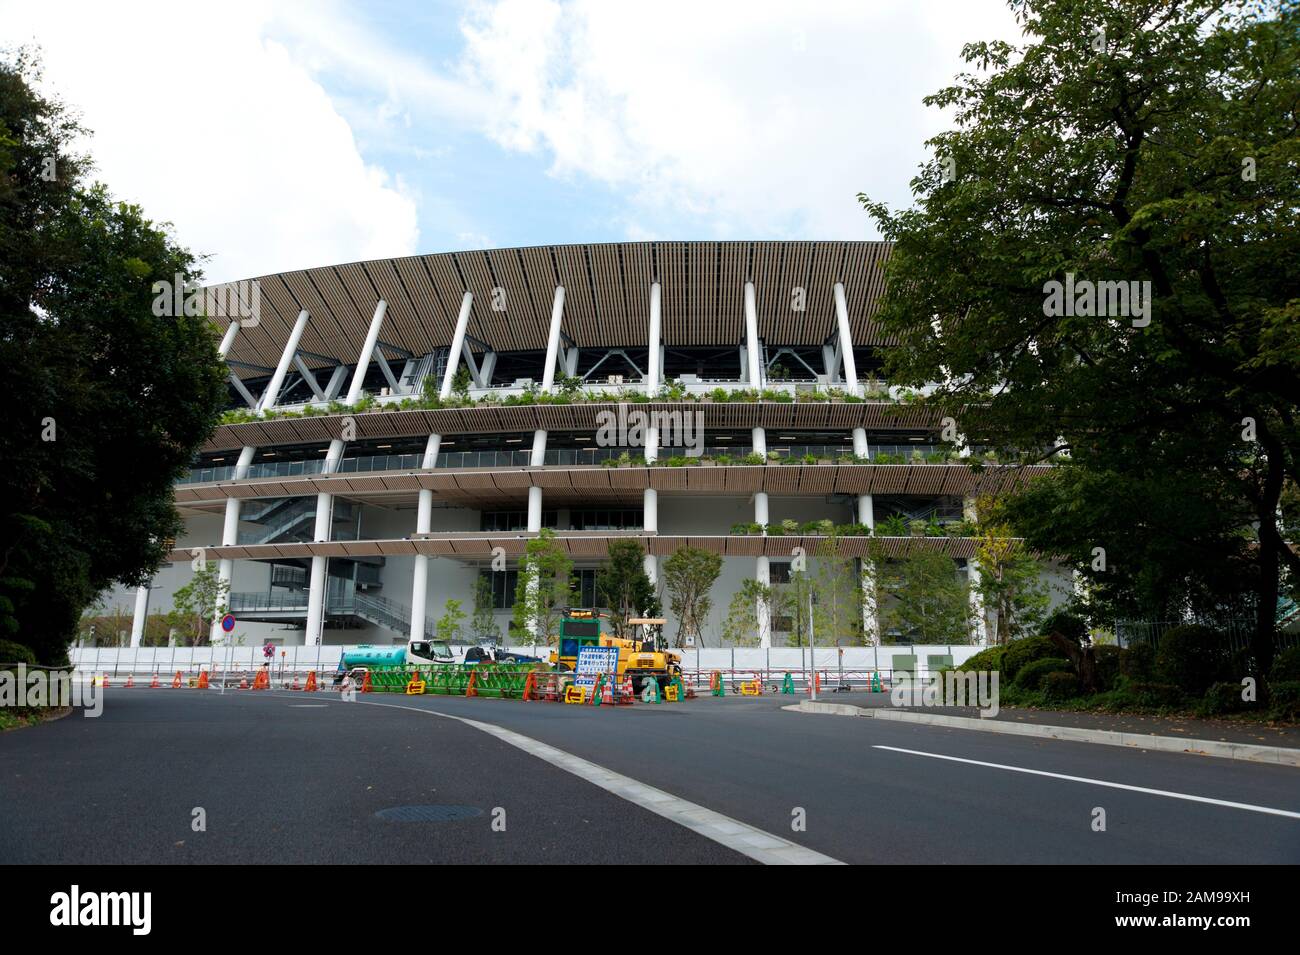 SHINJUKU CITY, TOKYO, JAPAN - SEPTEMBER 30, 2019: Front view of the Tokyo New National Stadium under construction for the 2020 Olympiad. Stock Photo